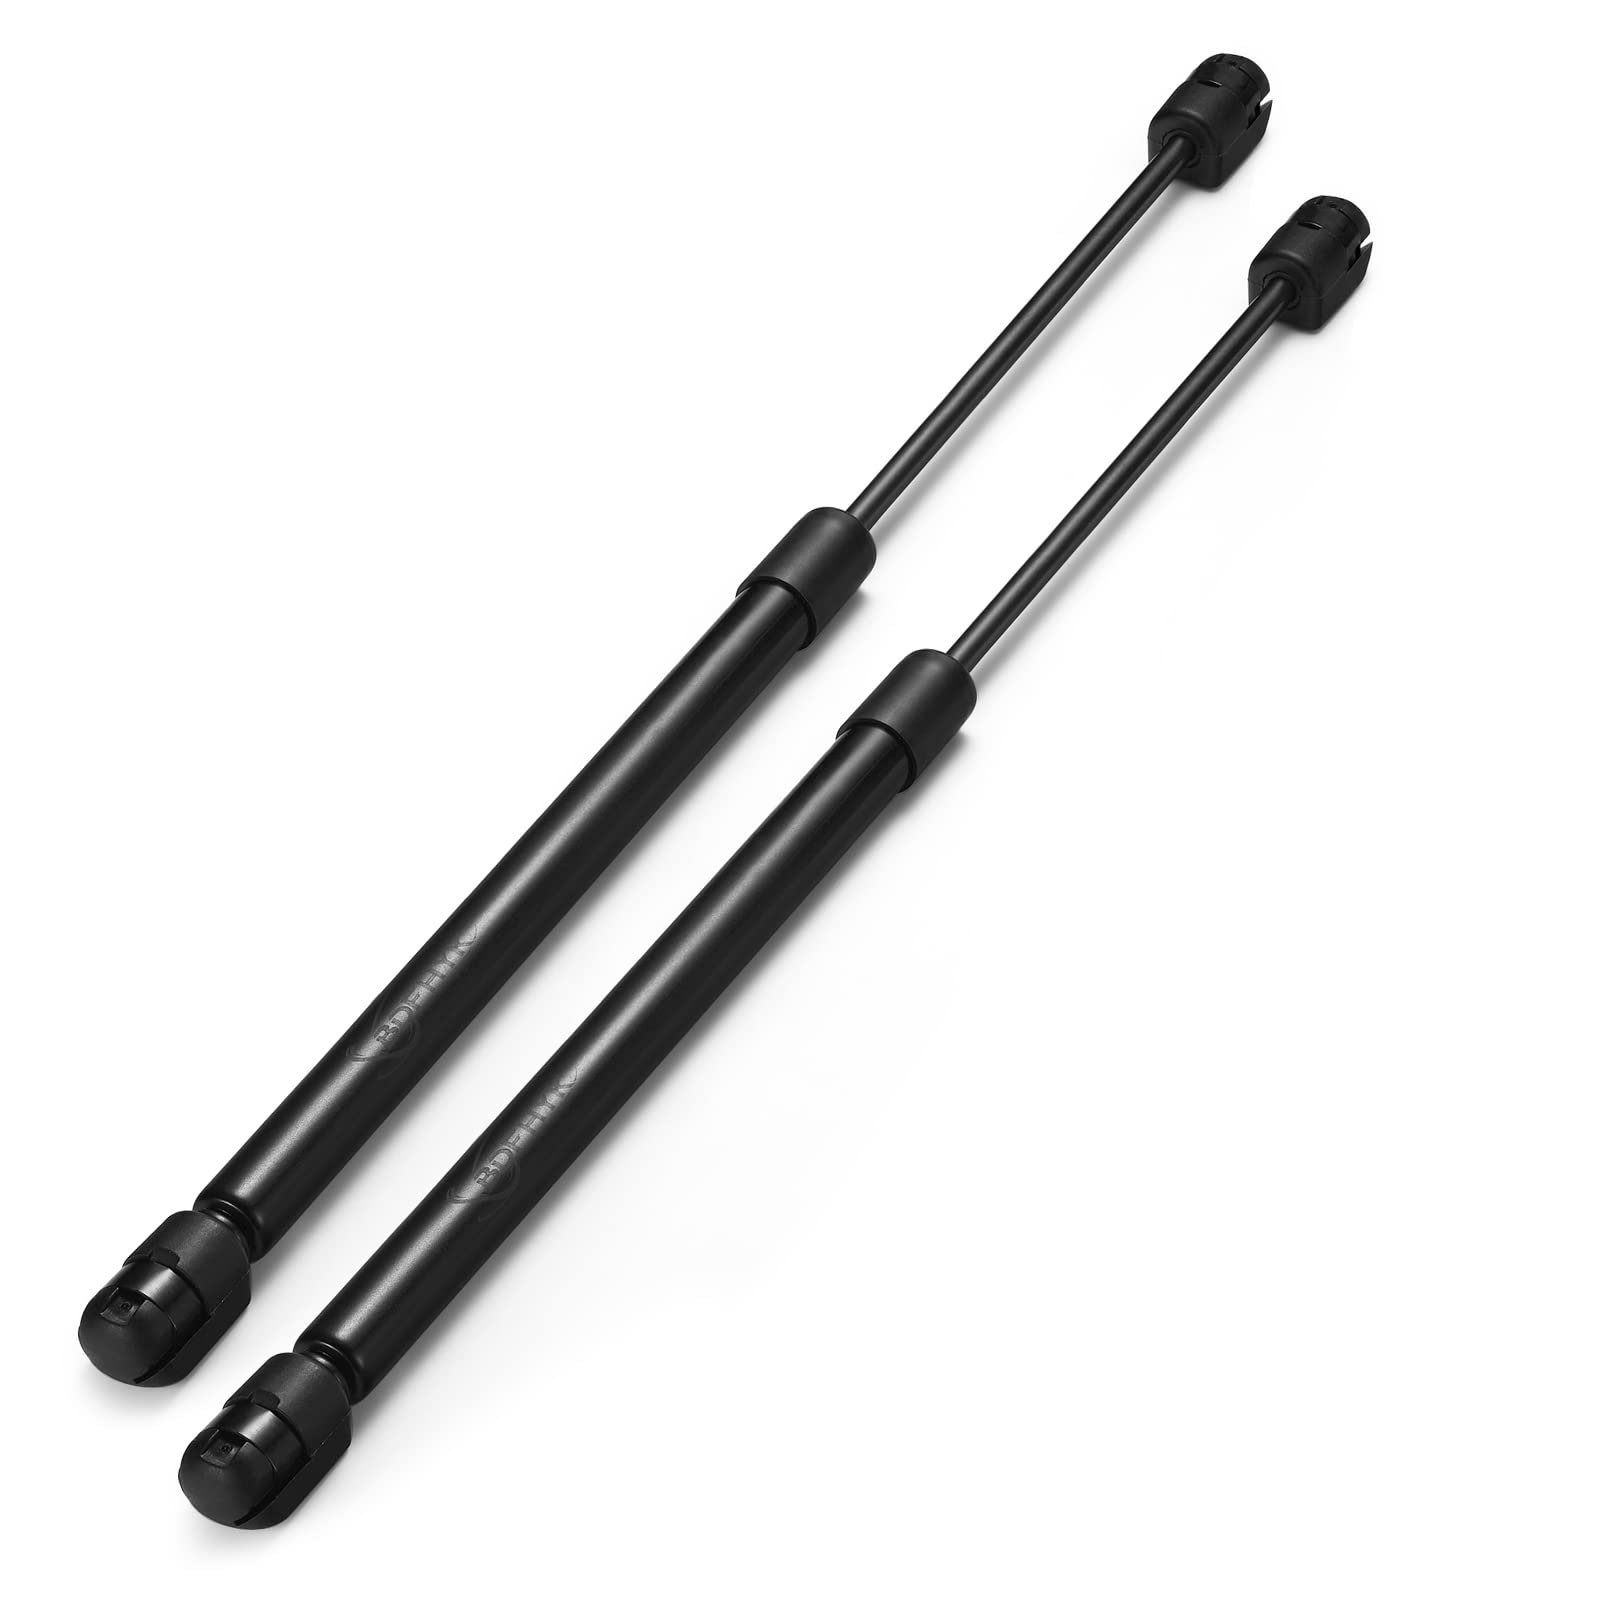 BDFHYK C16-06389 14 Inch 24 Lbs Truck Camper Shell Gas Shocks Struts Lift Support Gas Spring for Truck Cap Window Leer Topper Camper Shell Tool Box Chest C1606389